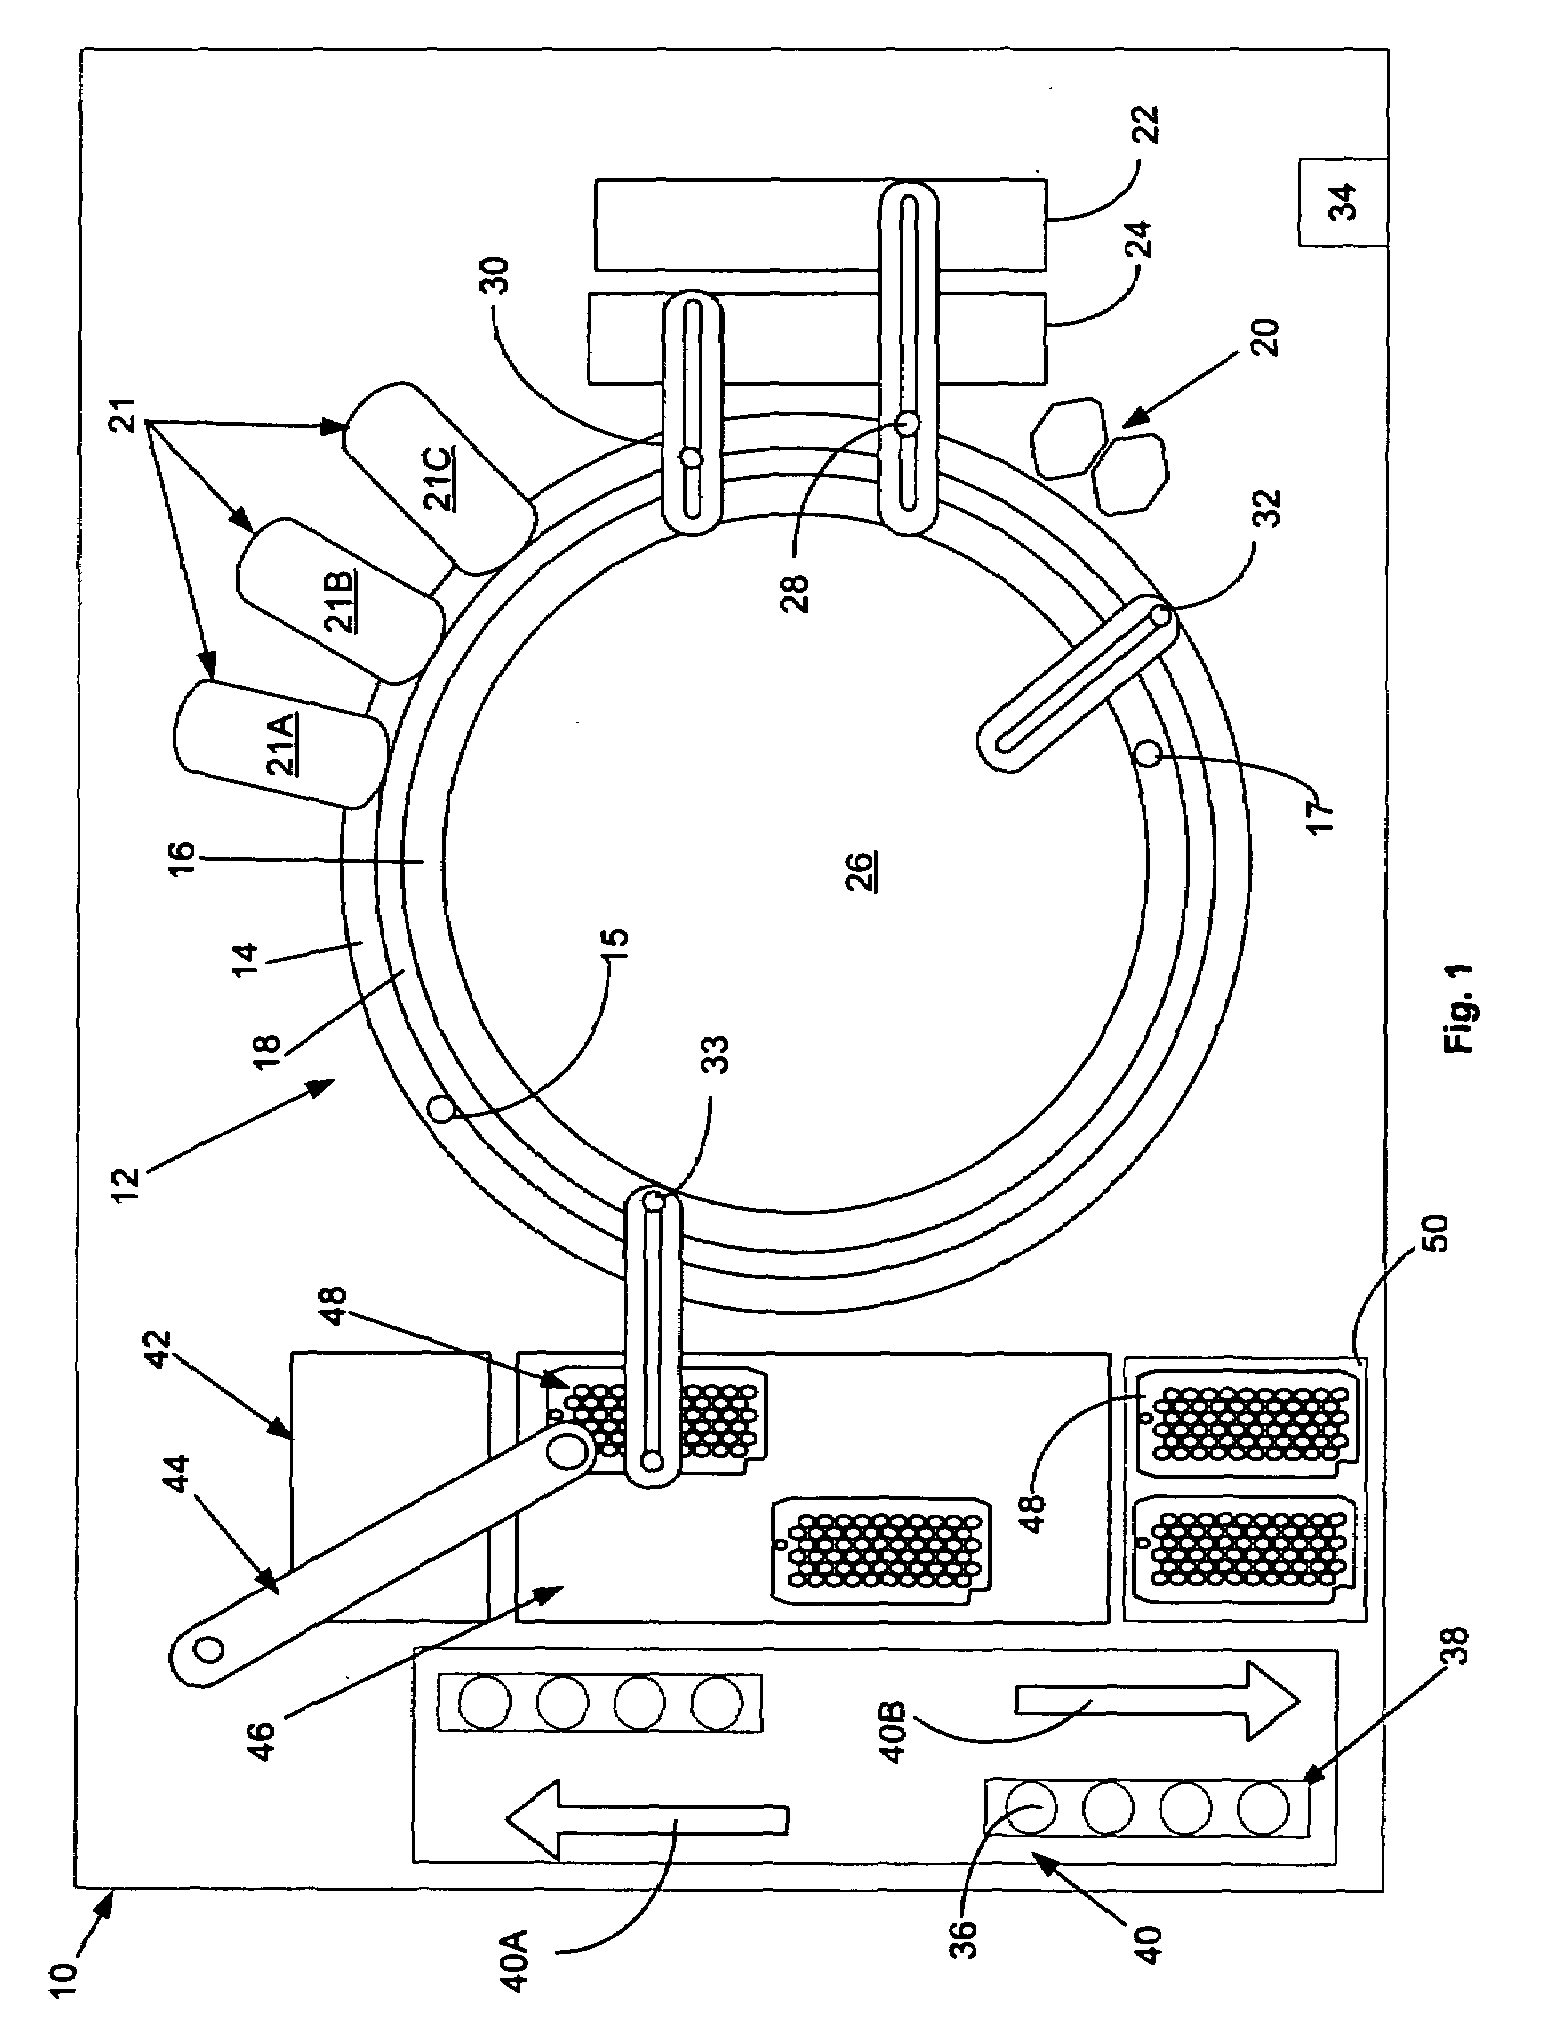 System for automatically storing and reprocessing patient sample's in an automatic clinical analyzer